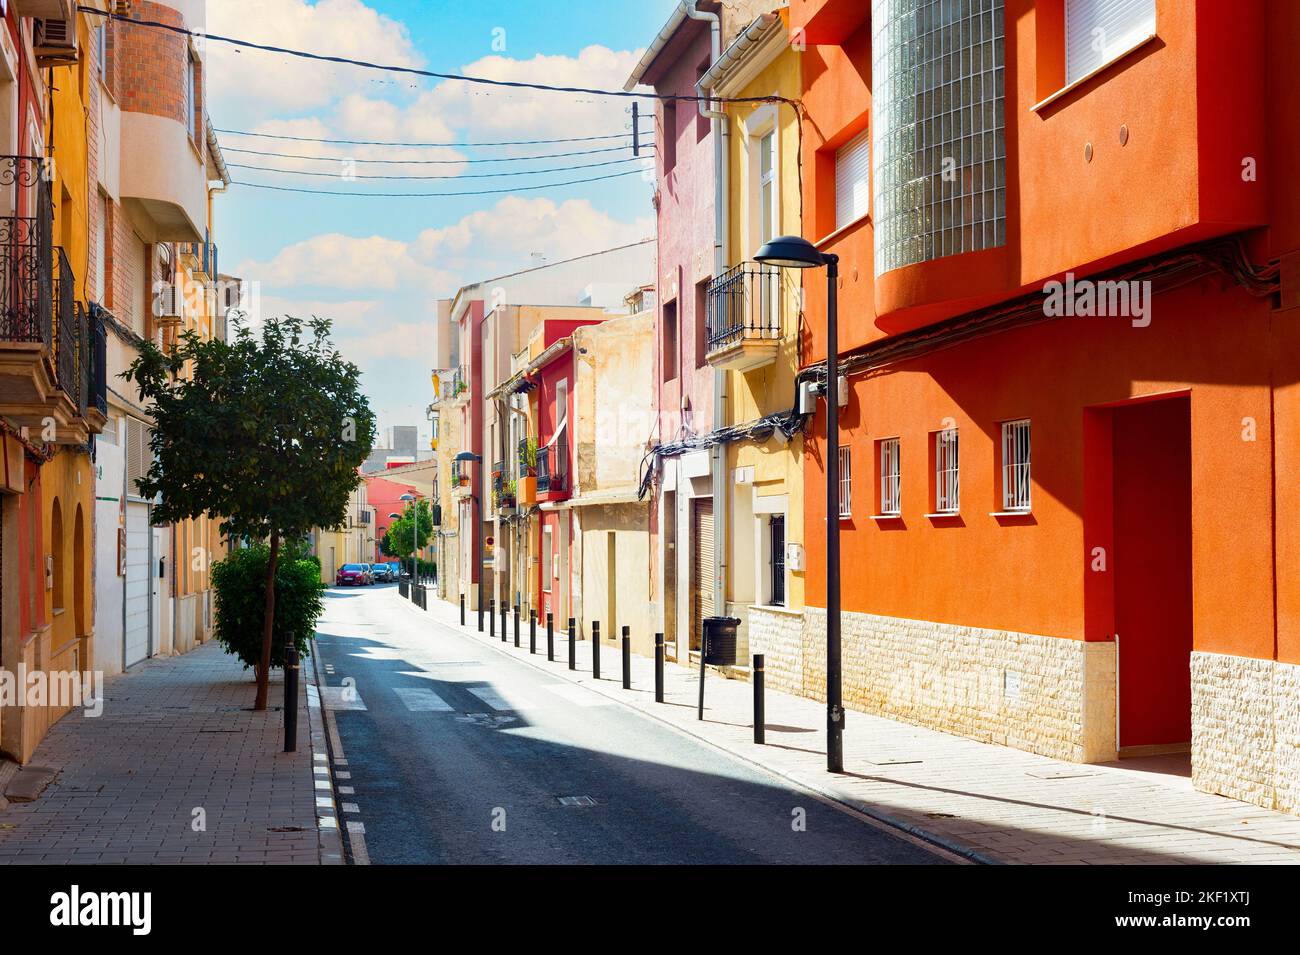 Street with traditional architecture of Mediterranean region, Alicante, Spain Stock Photo